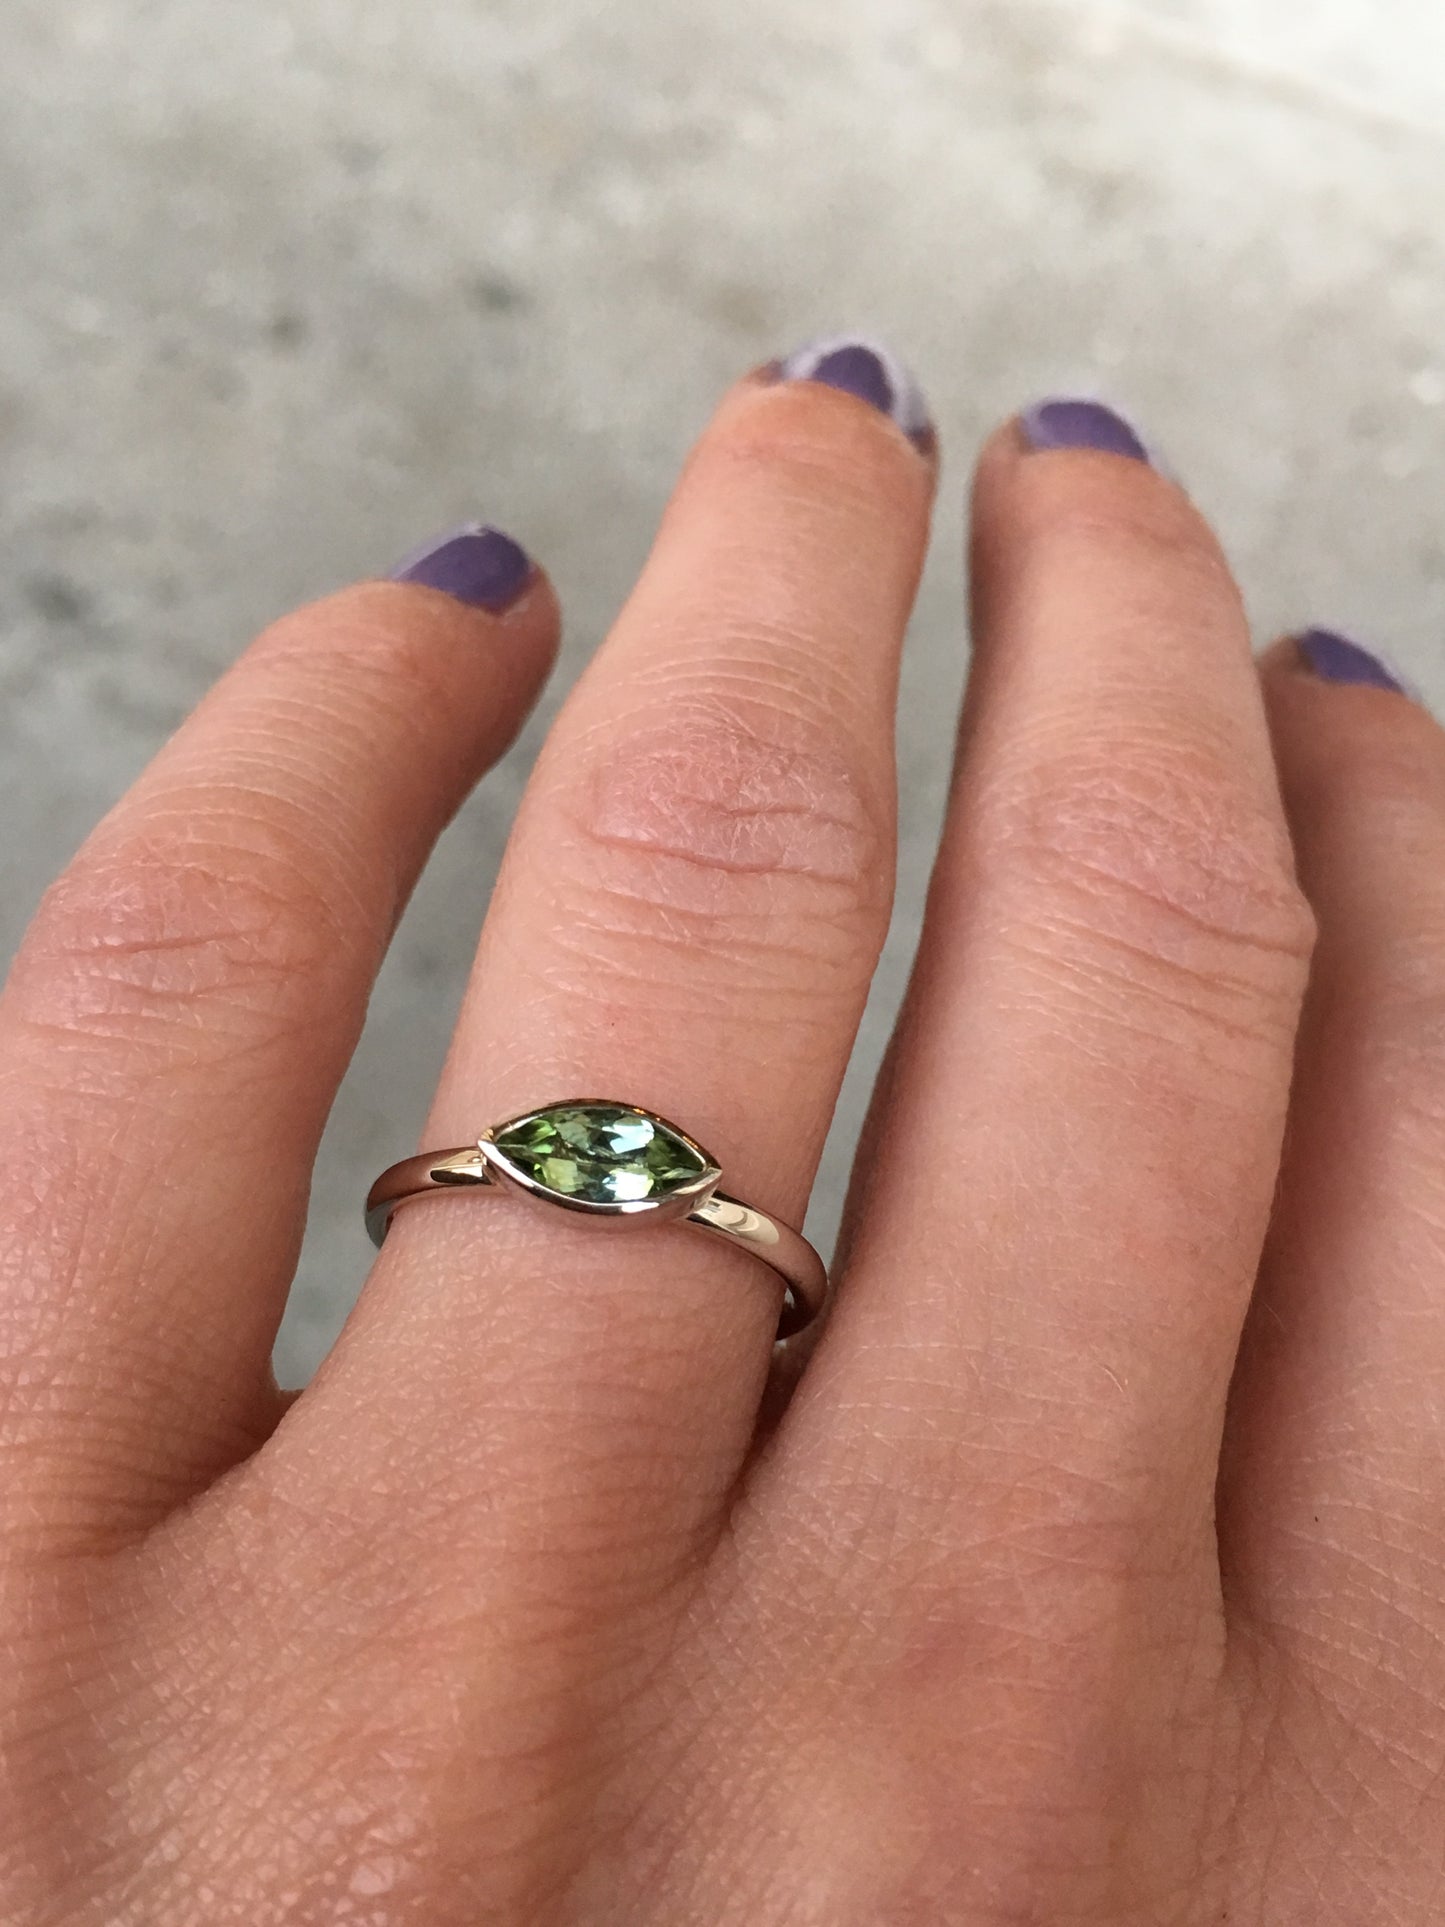 14k white gold ring set with an olive green tourmaline